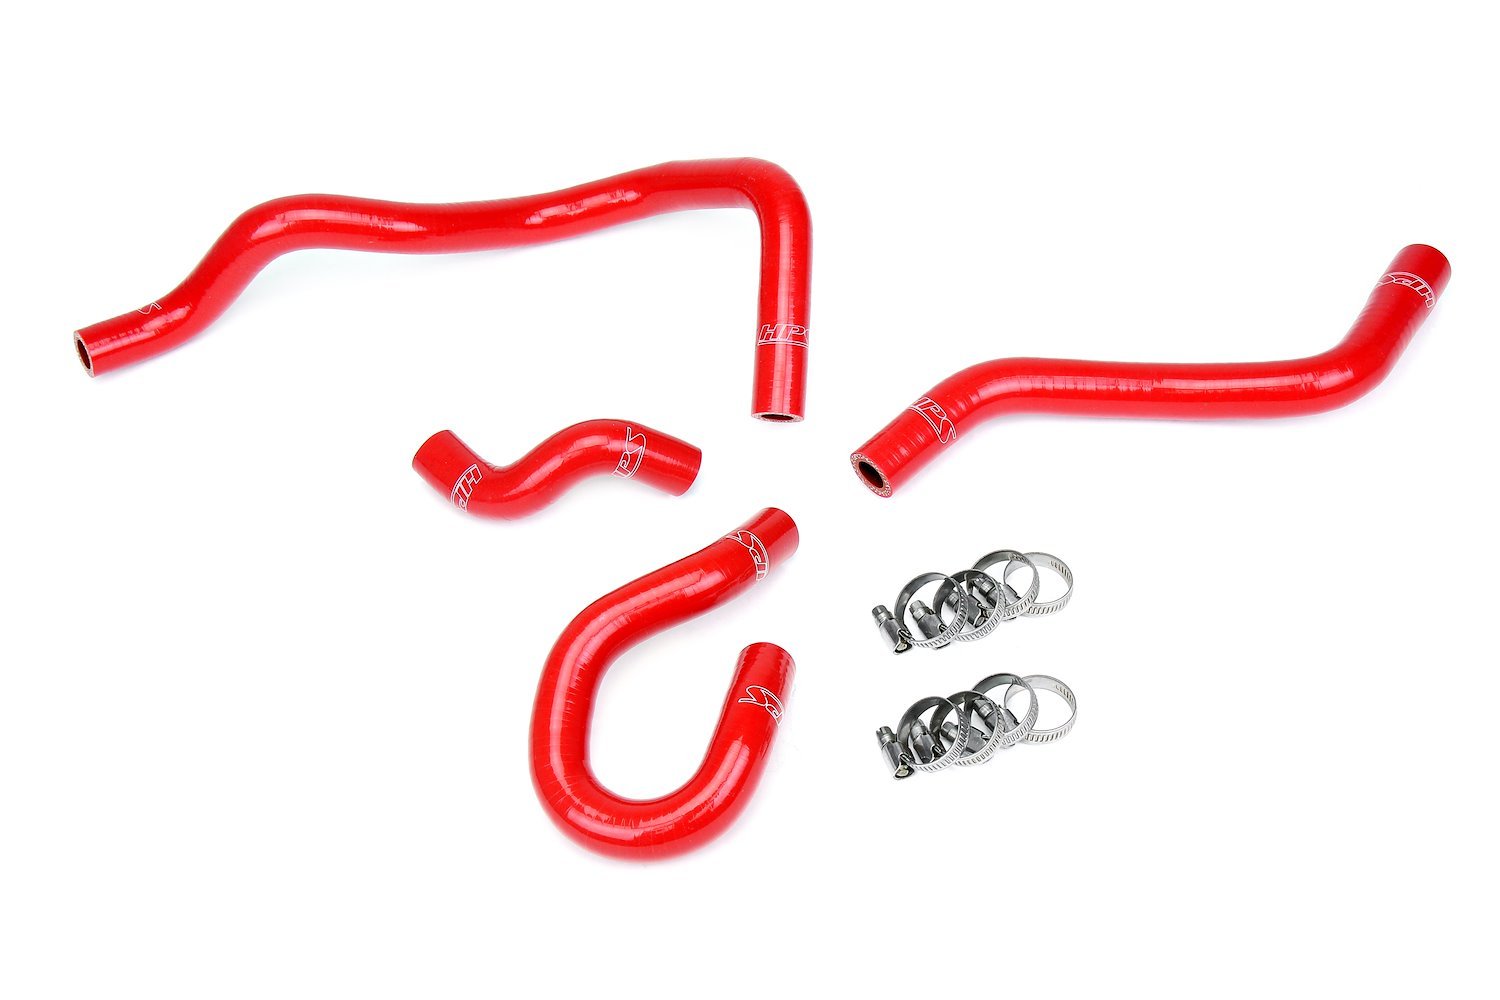 57-1774-RED Heater Hose Kit, 3-Ply Reinforced Silicone, Replaces Rubber Heater Coolant & Water Bypass Hoses